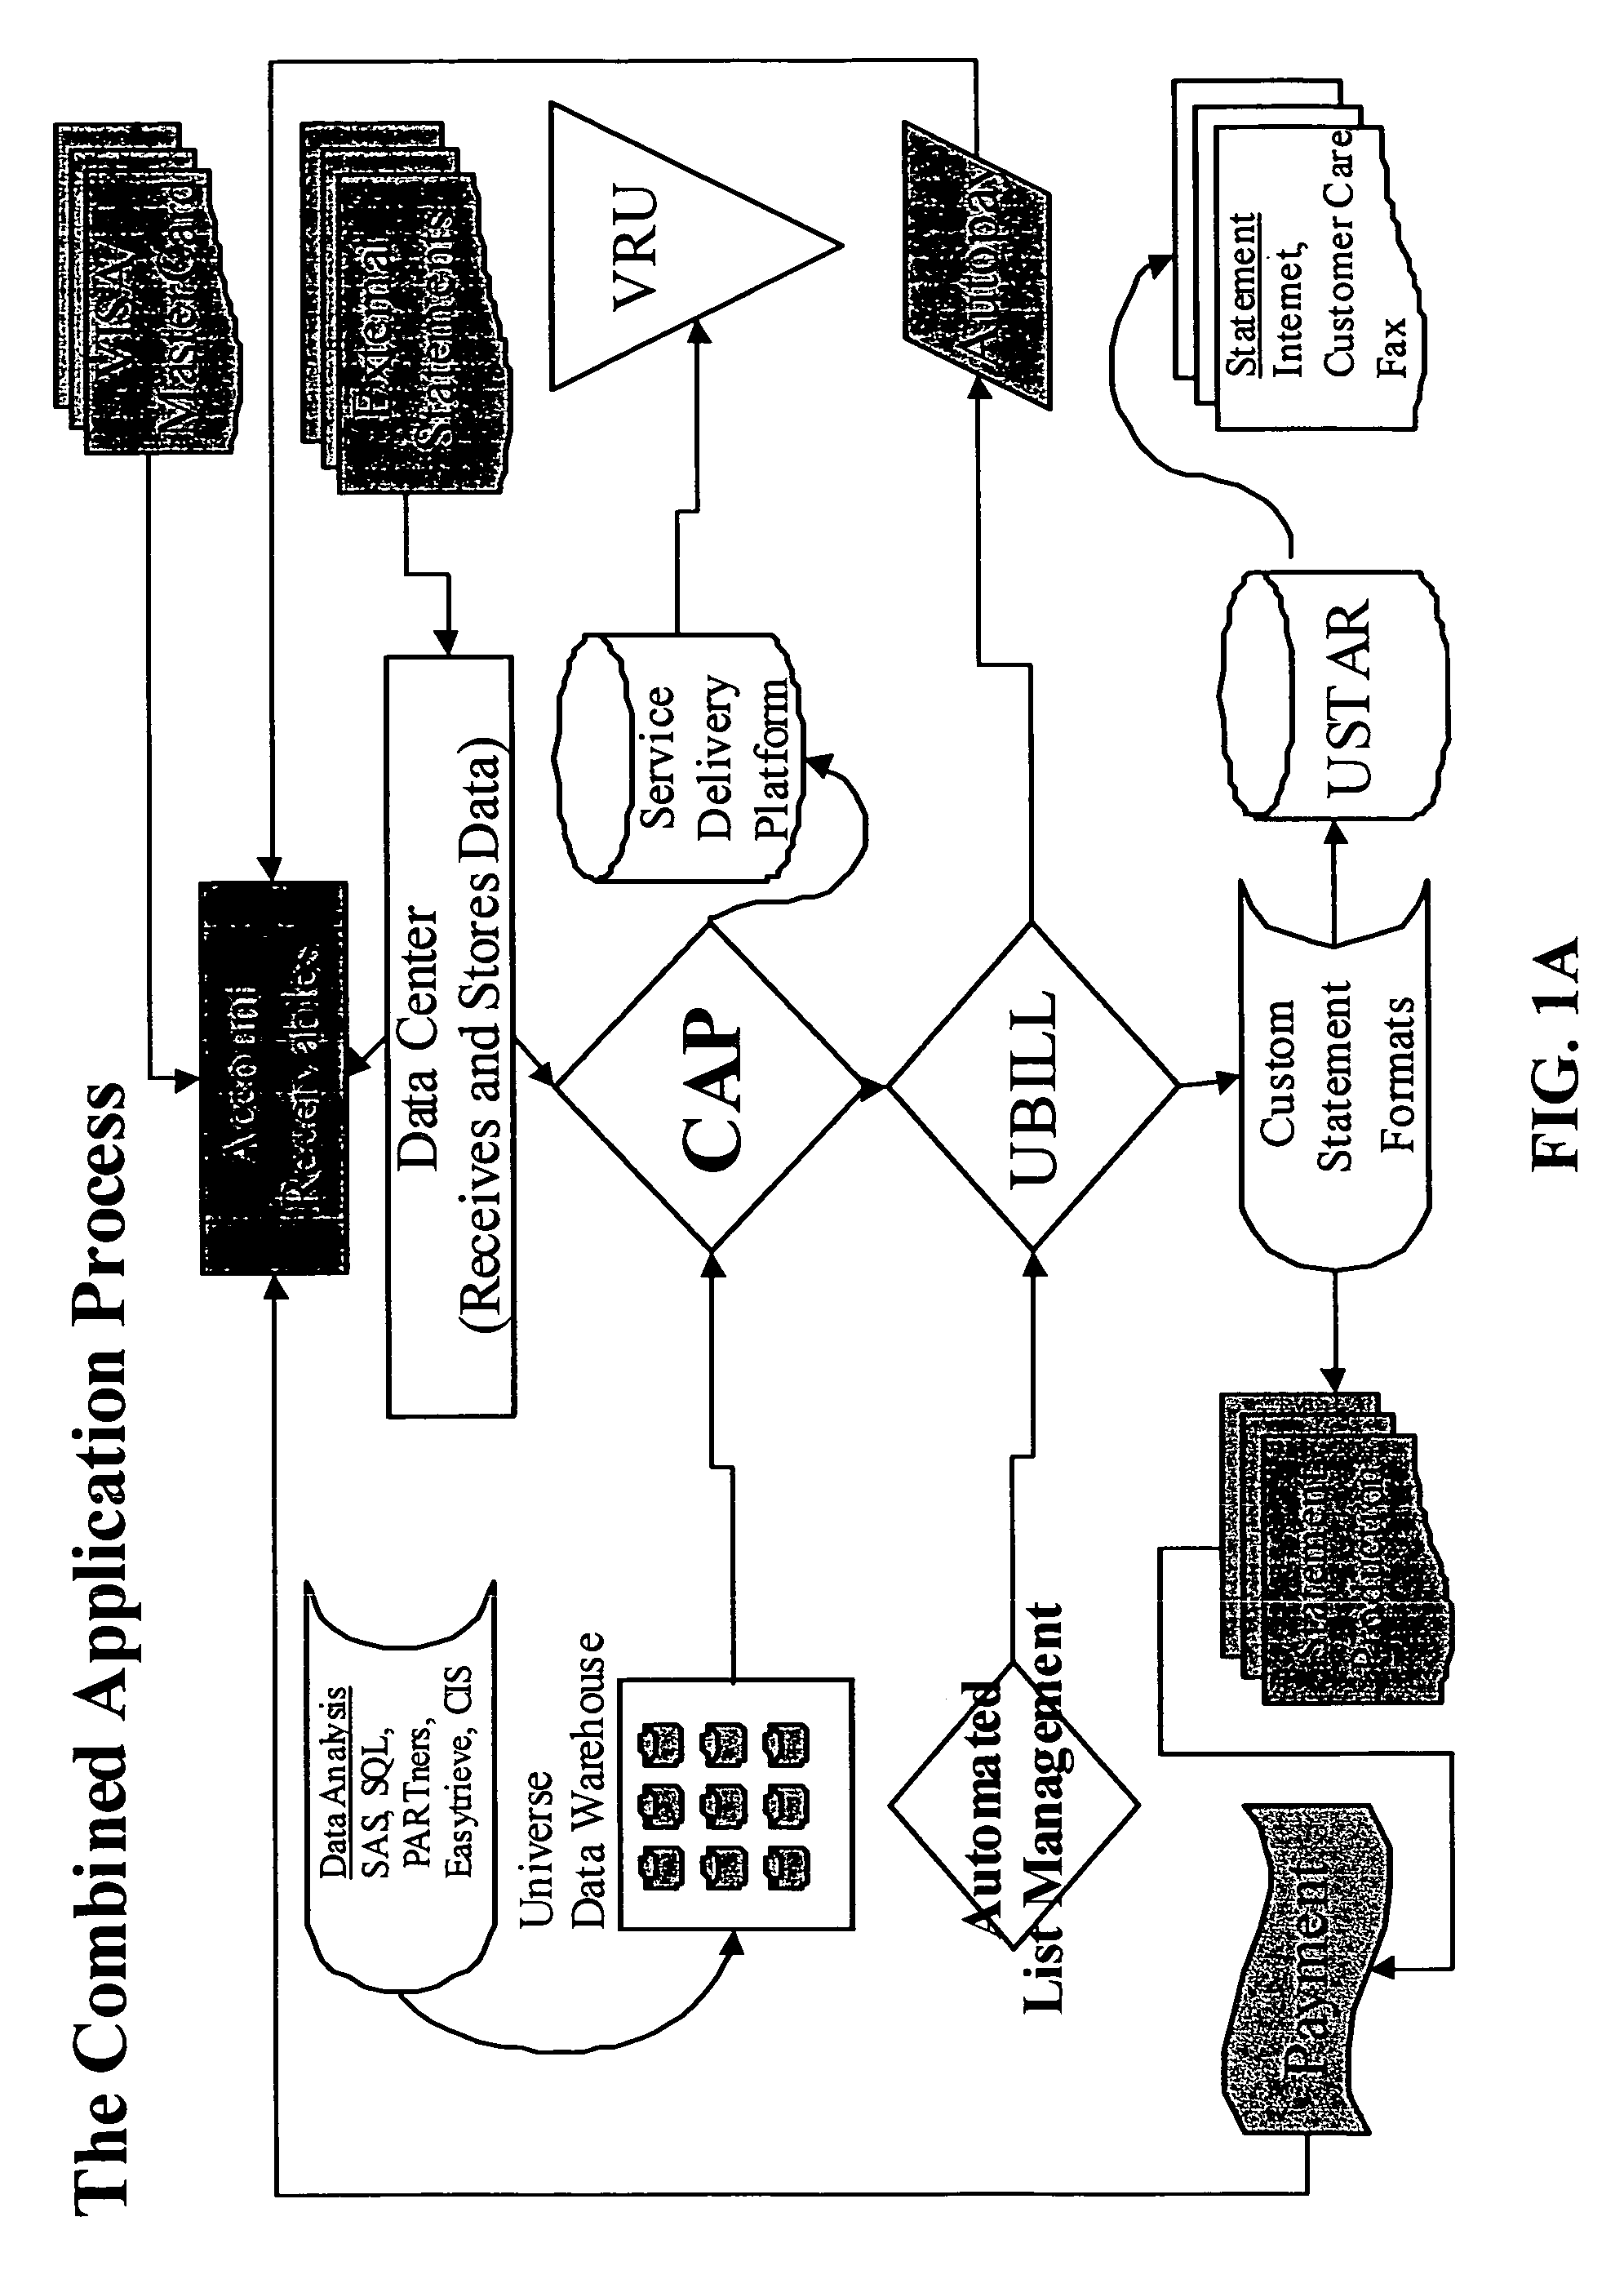 Method and system of combined billing of multiple accounts on a single statement